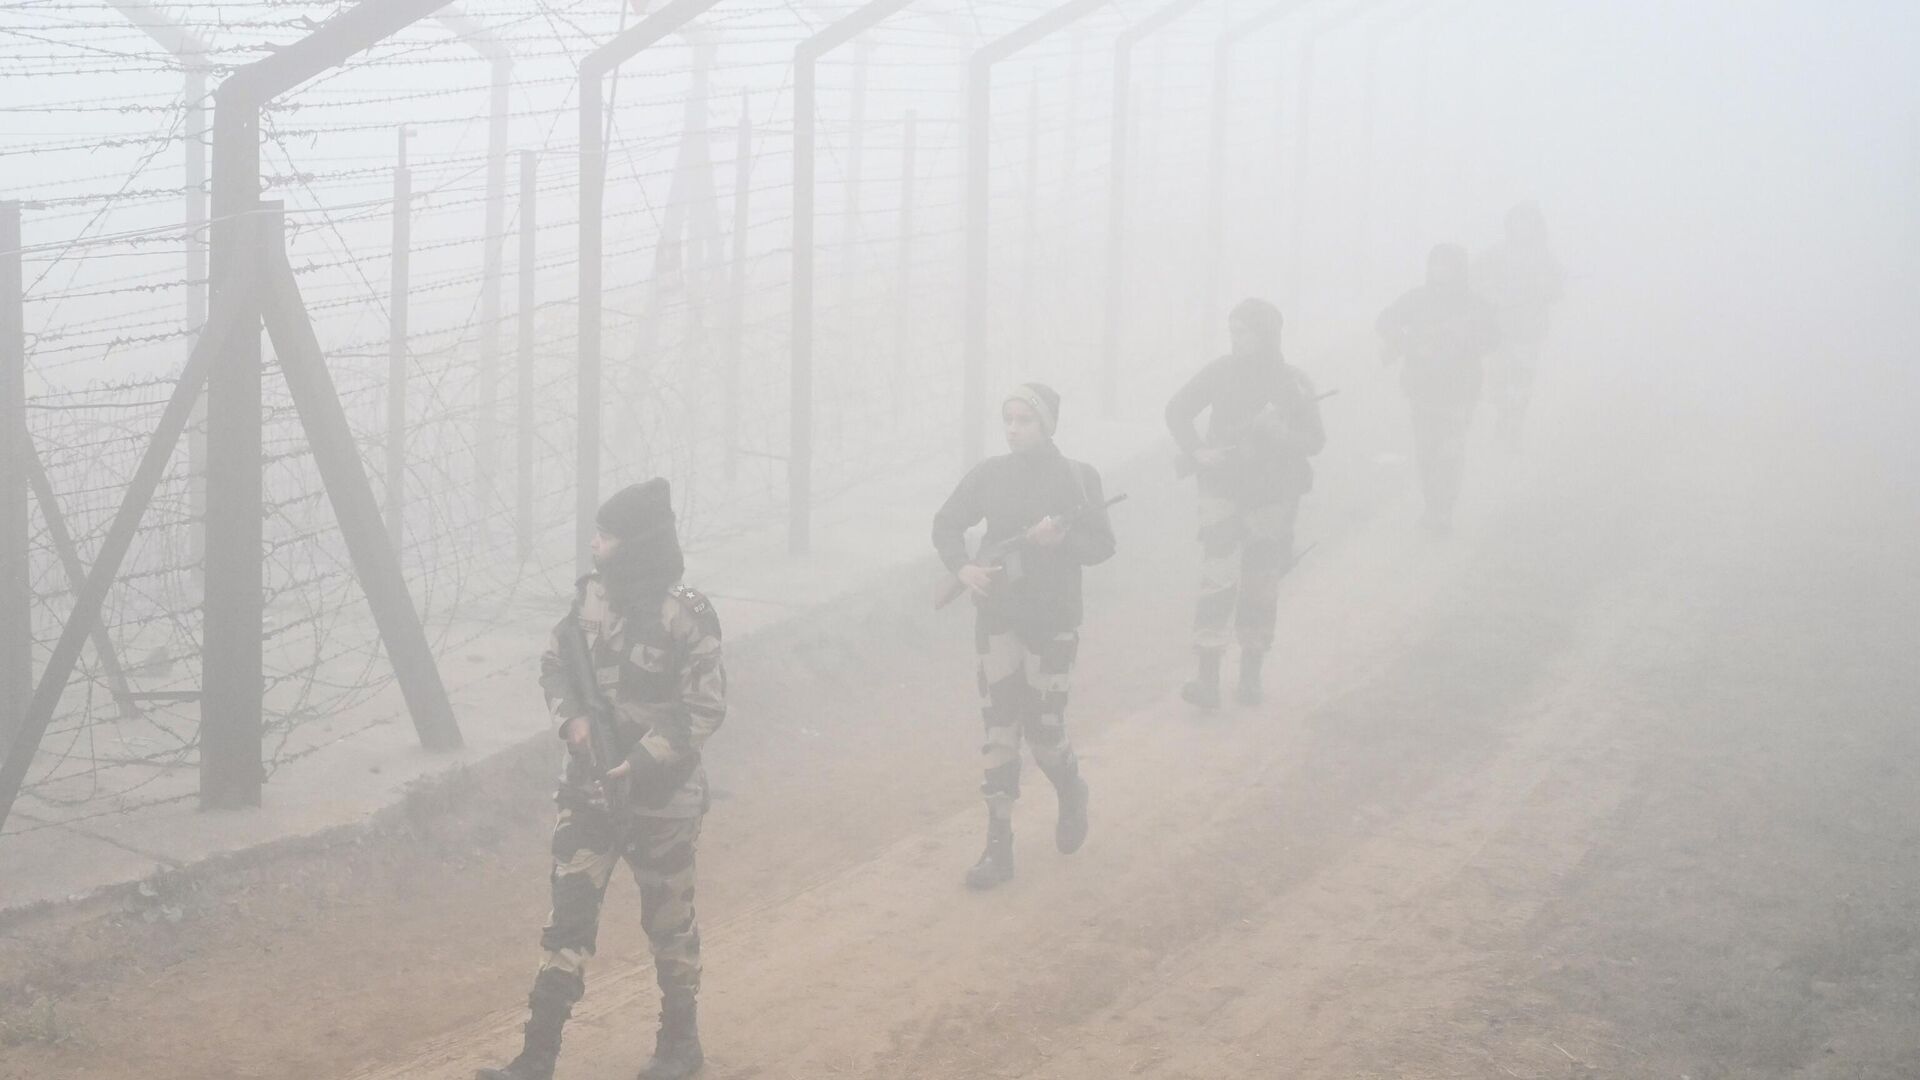 Border Security Force (BSF) personnel patrol along the border fence during a cold foggy morning near India-Pakistan Wagah border about 40km from Amritsar on December 21, 2022 - Sputnik India, 1920, 04.01.2023